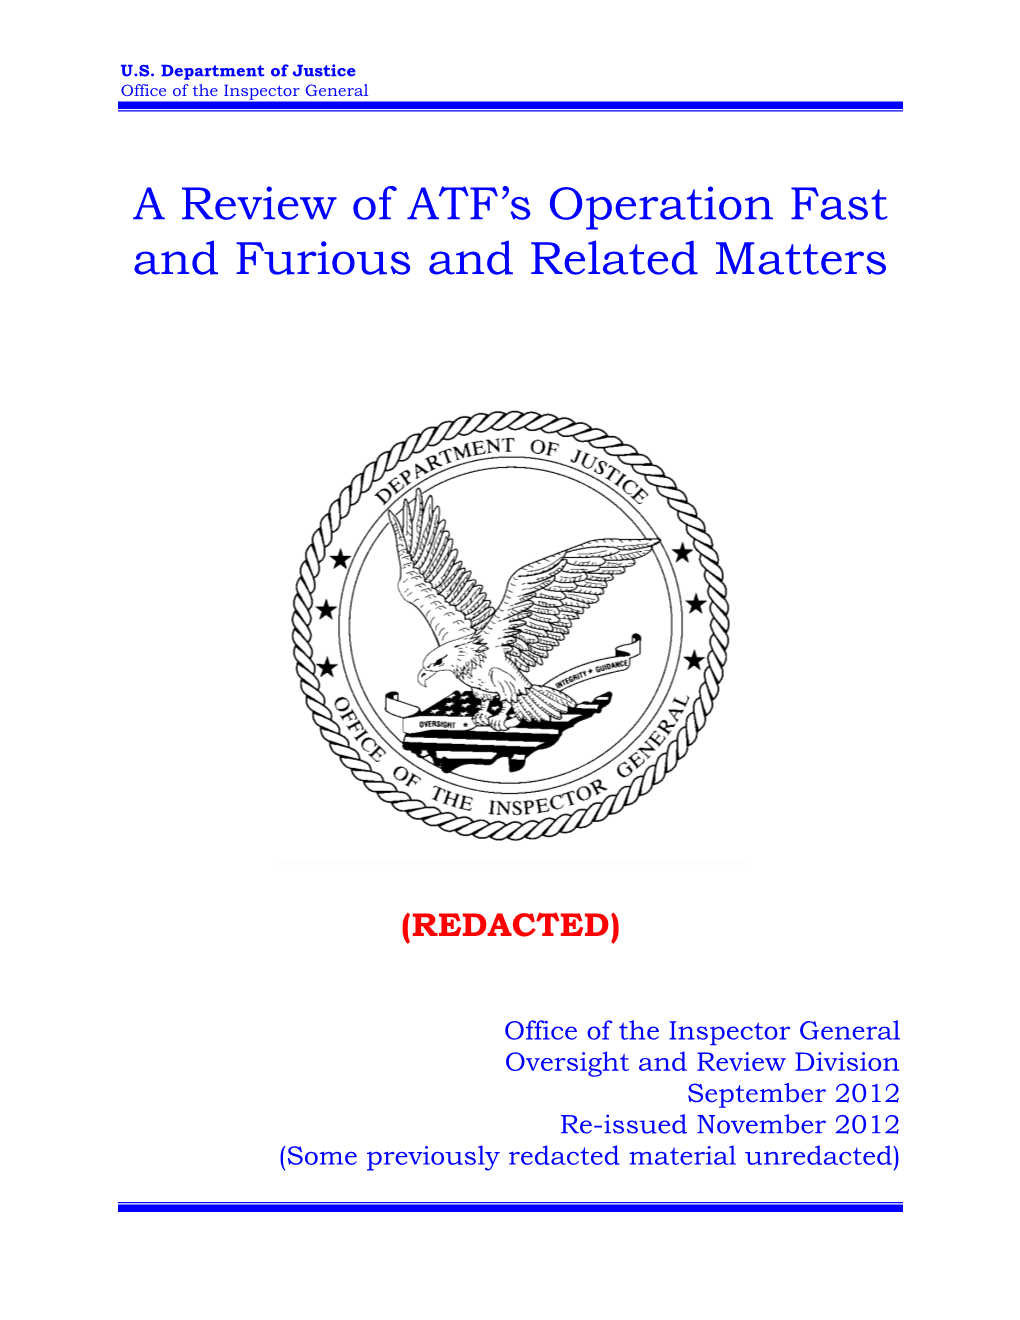 A Review of ATF's Operation Fast and Furious and Related Matters